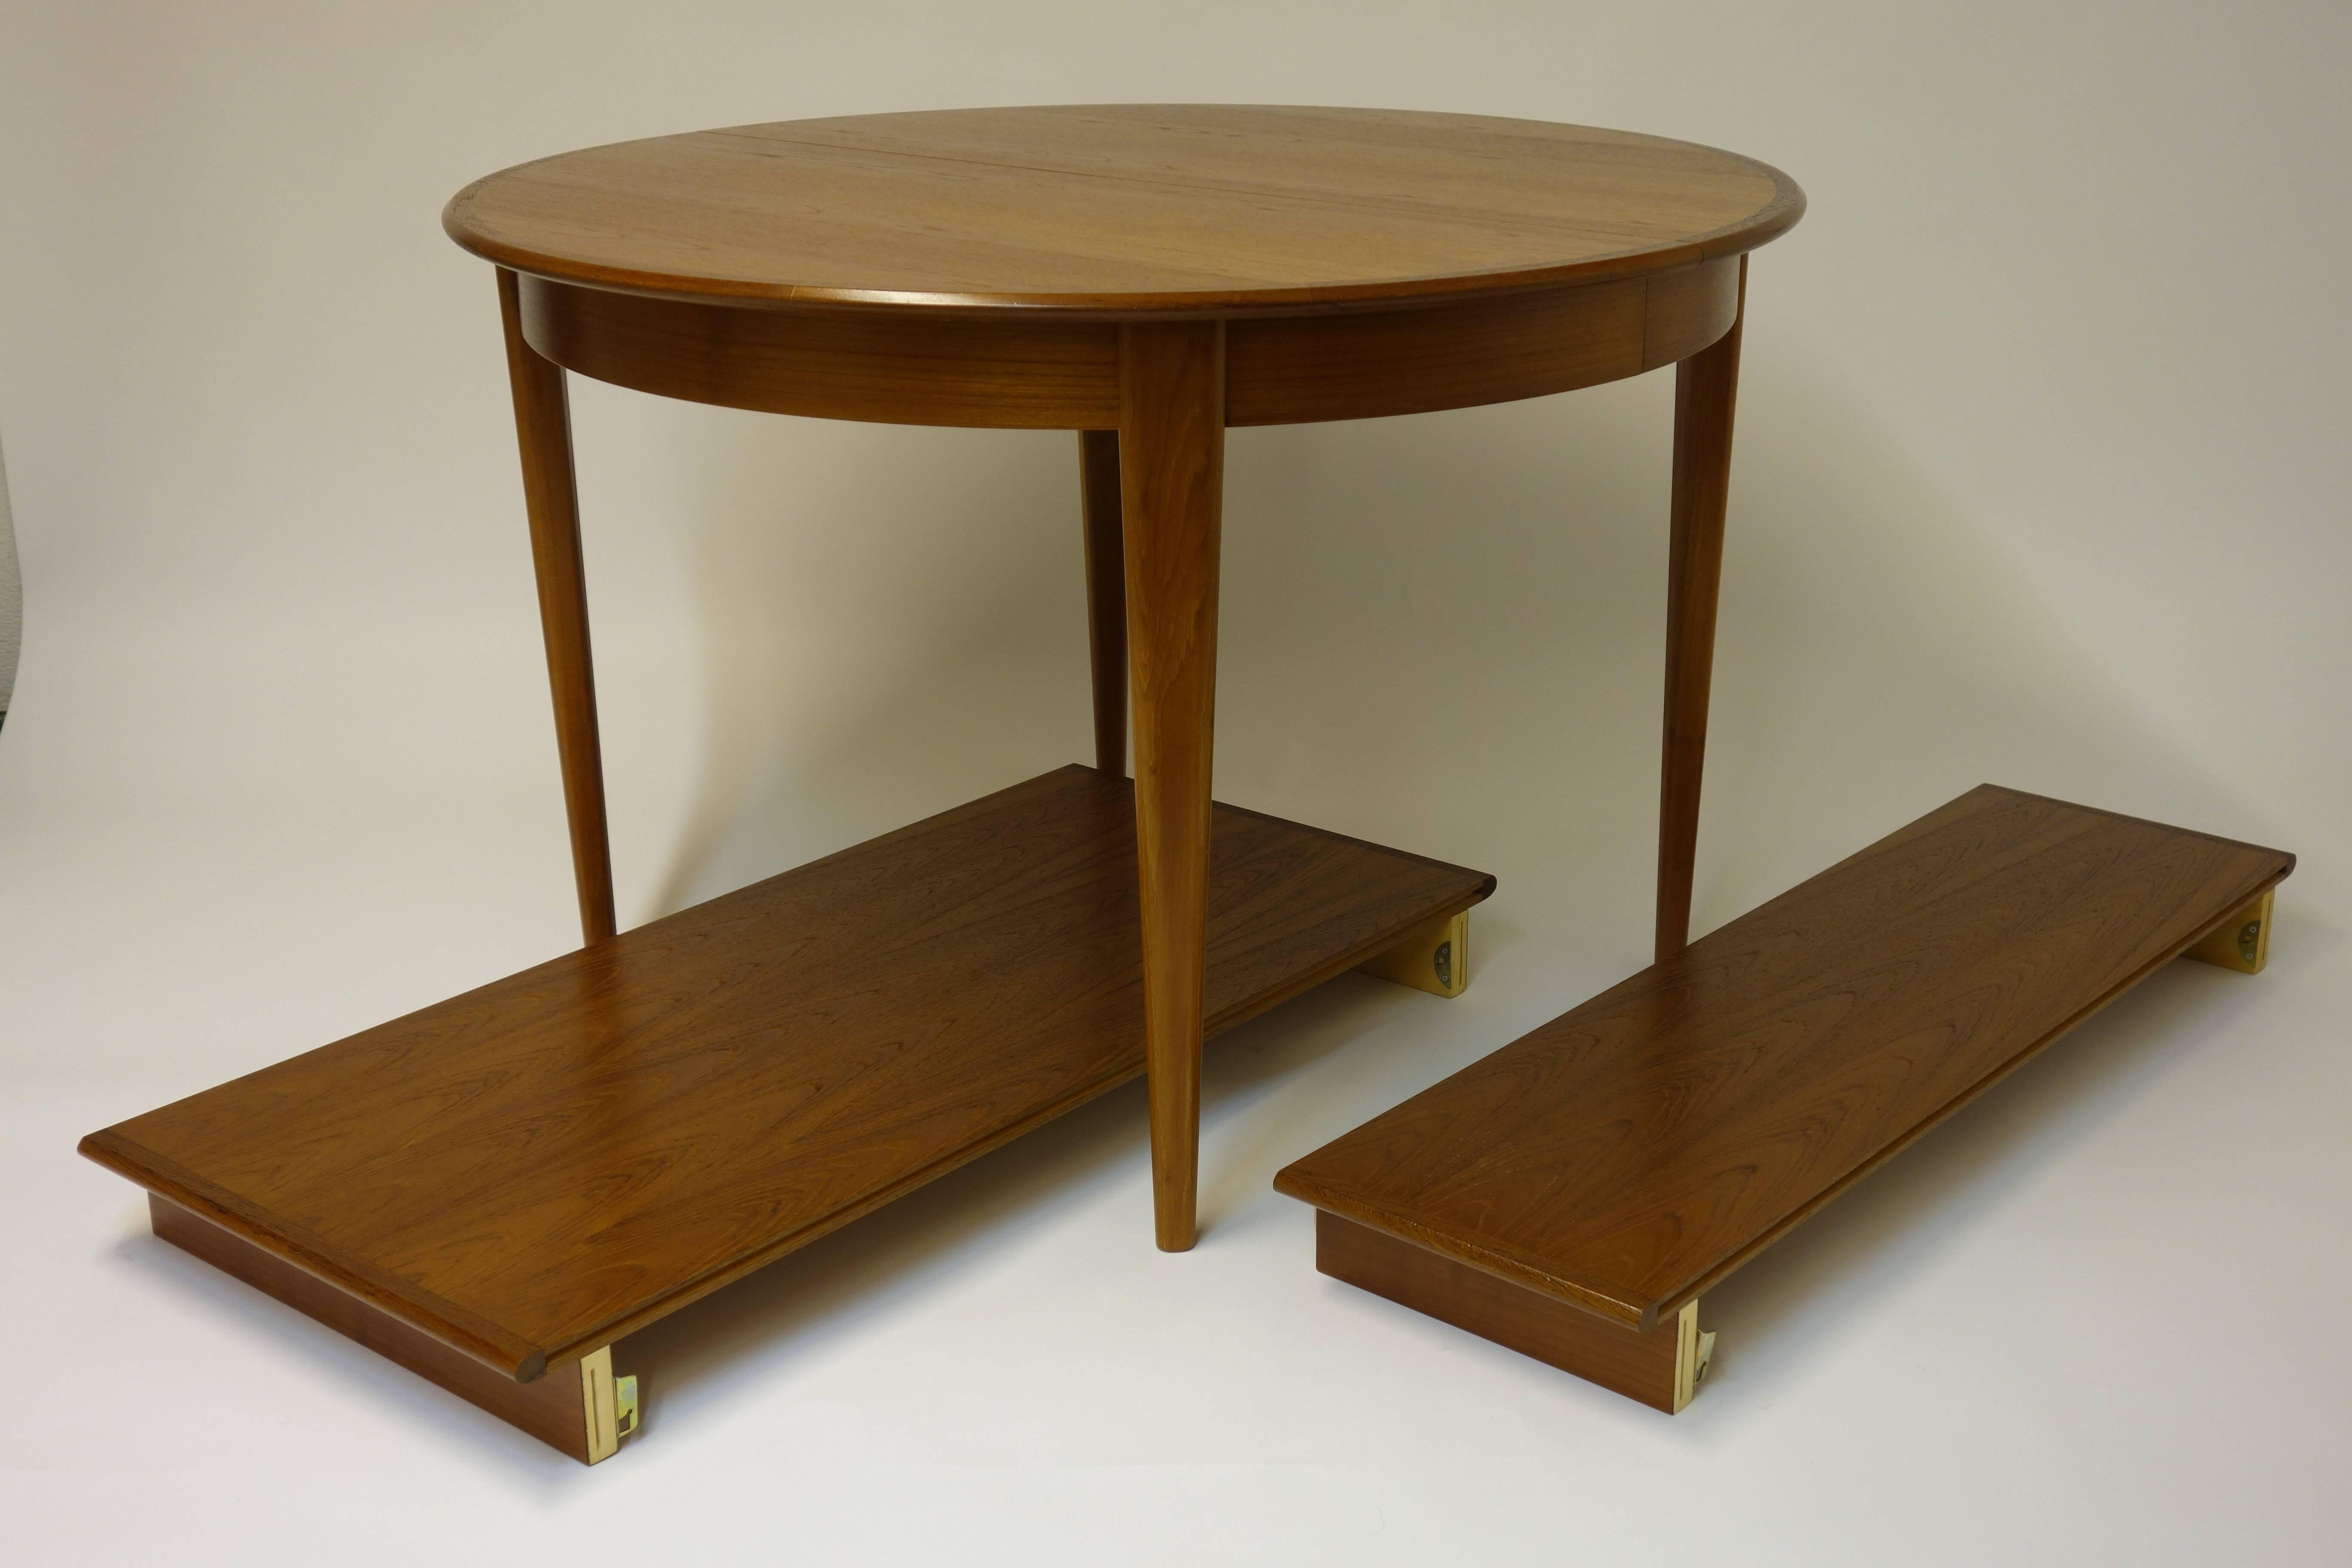 Extraordinary dining room set designed by Johannes Andersen, Denmark 1960s. It is manufactured of solid teak wood and consists of a dining table with a diameter of 110cm. Its length can be enlarged with two separate extensions (50cm and 30cm)